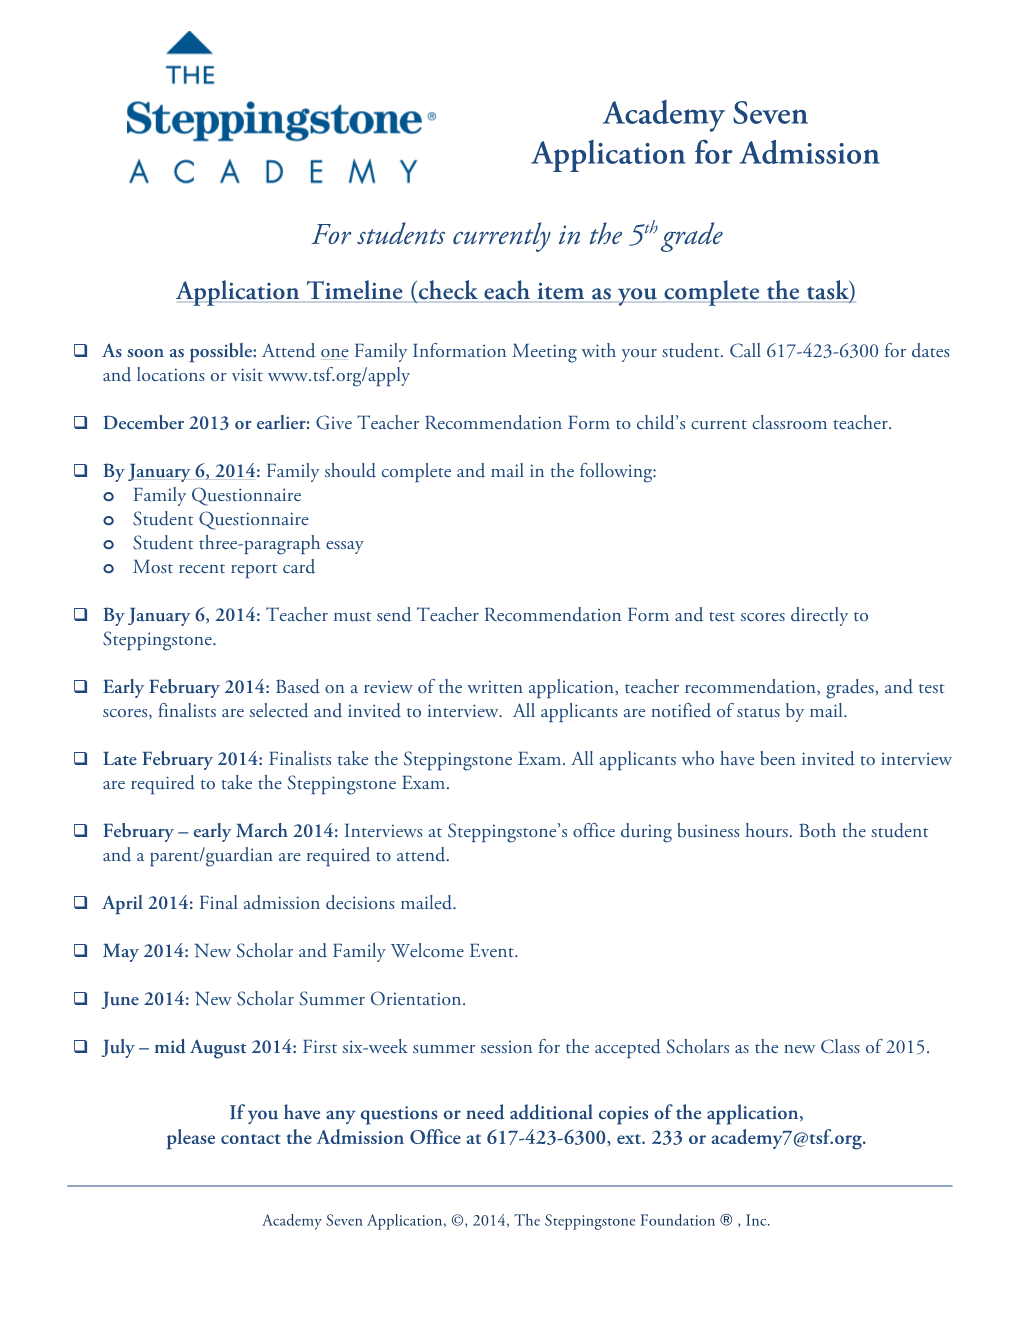 Academy Seven Application for Admission